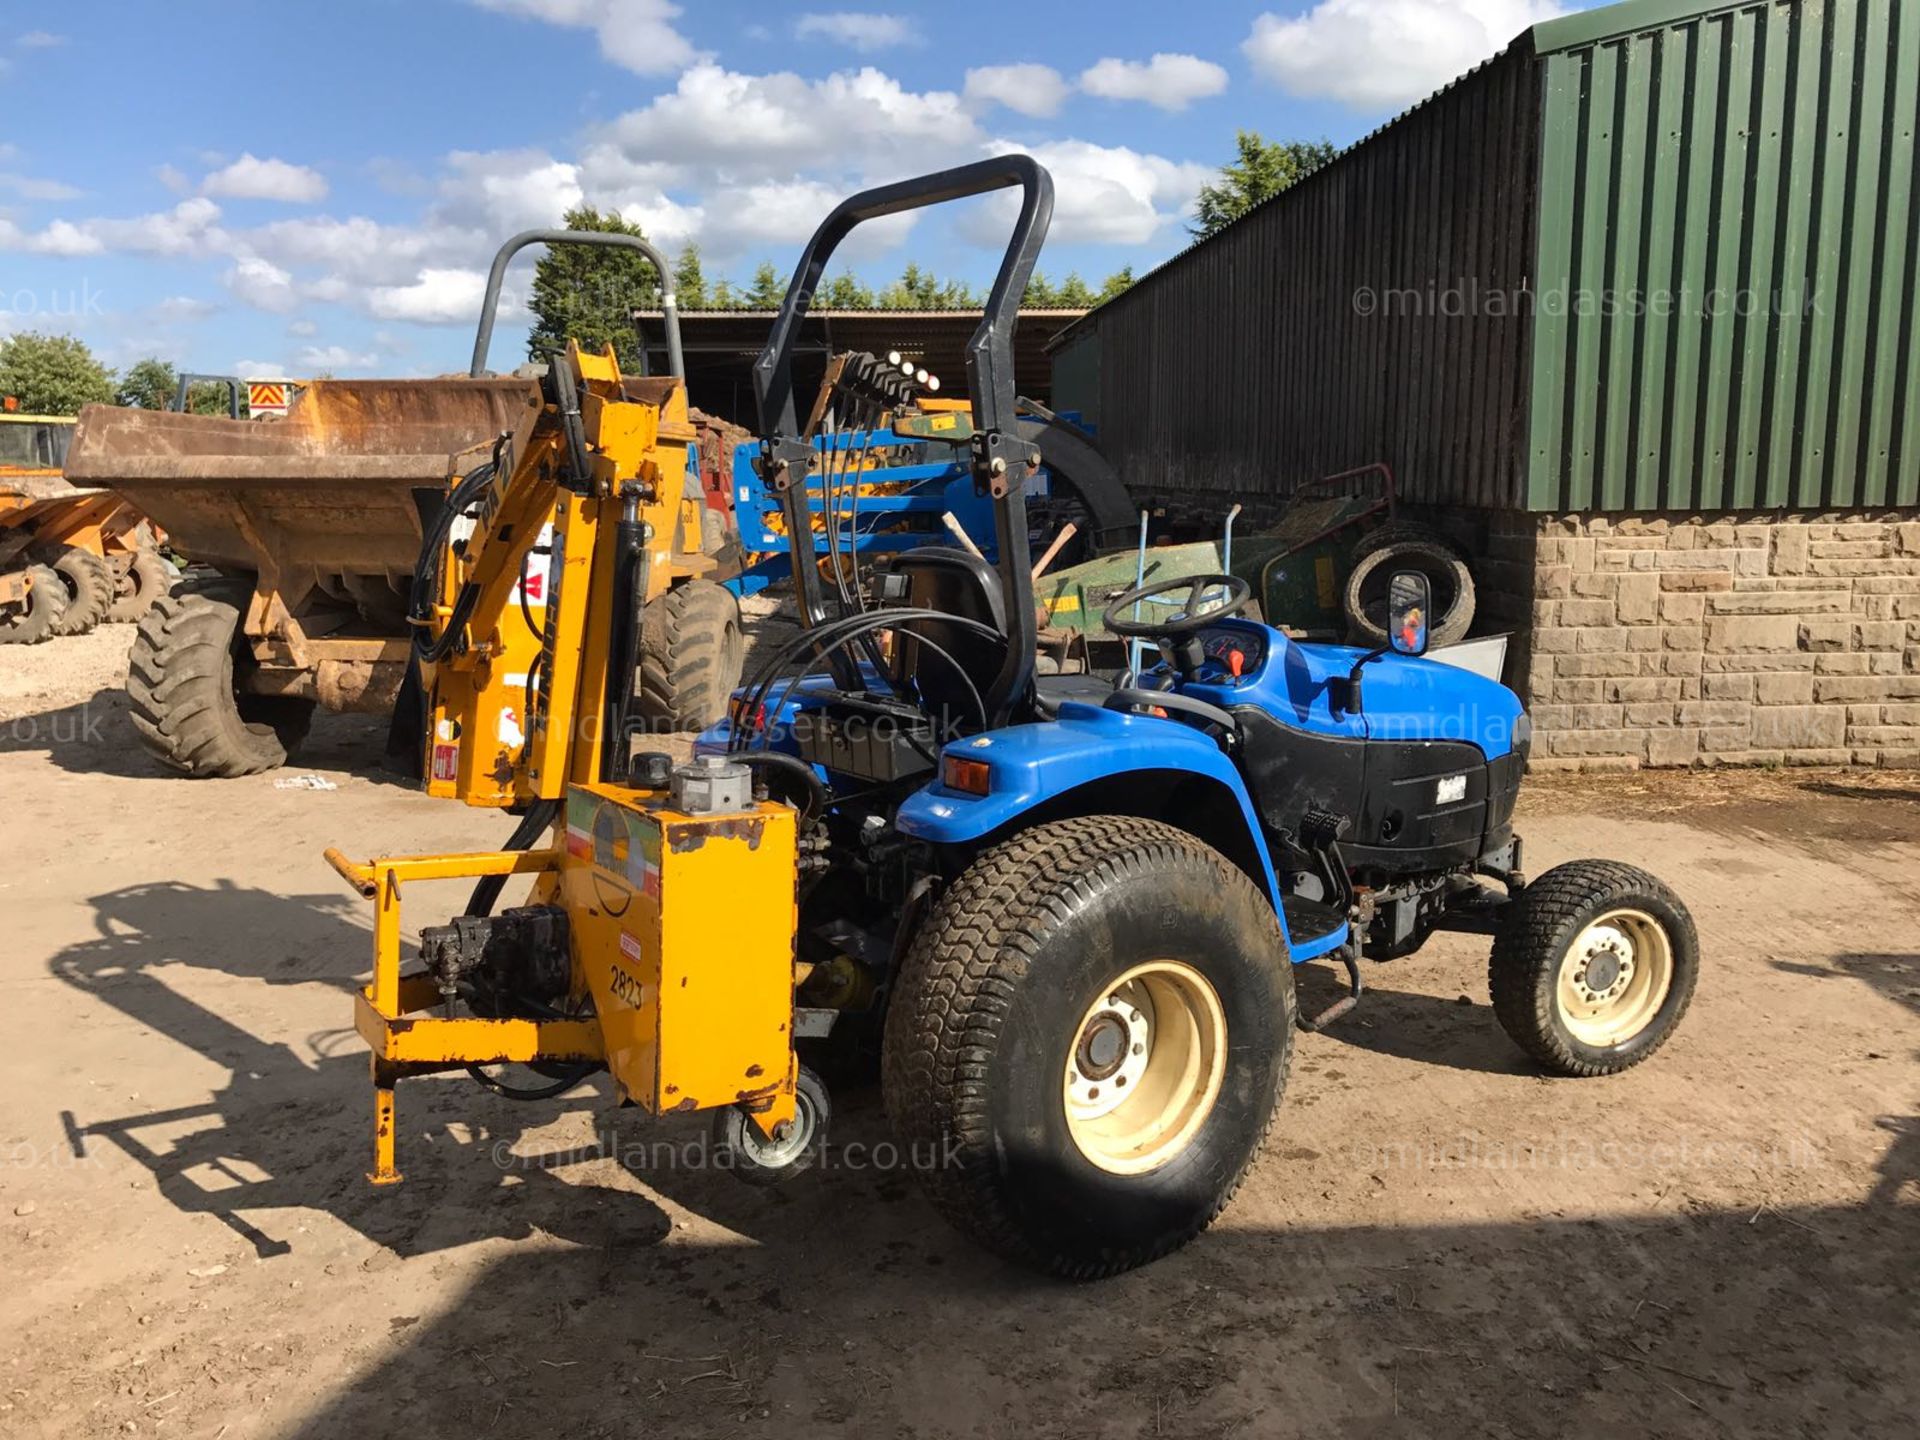 NEW HOLLAND TC27D TRACTOR - Image 9 of 11